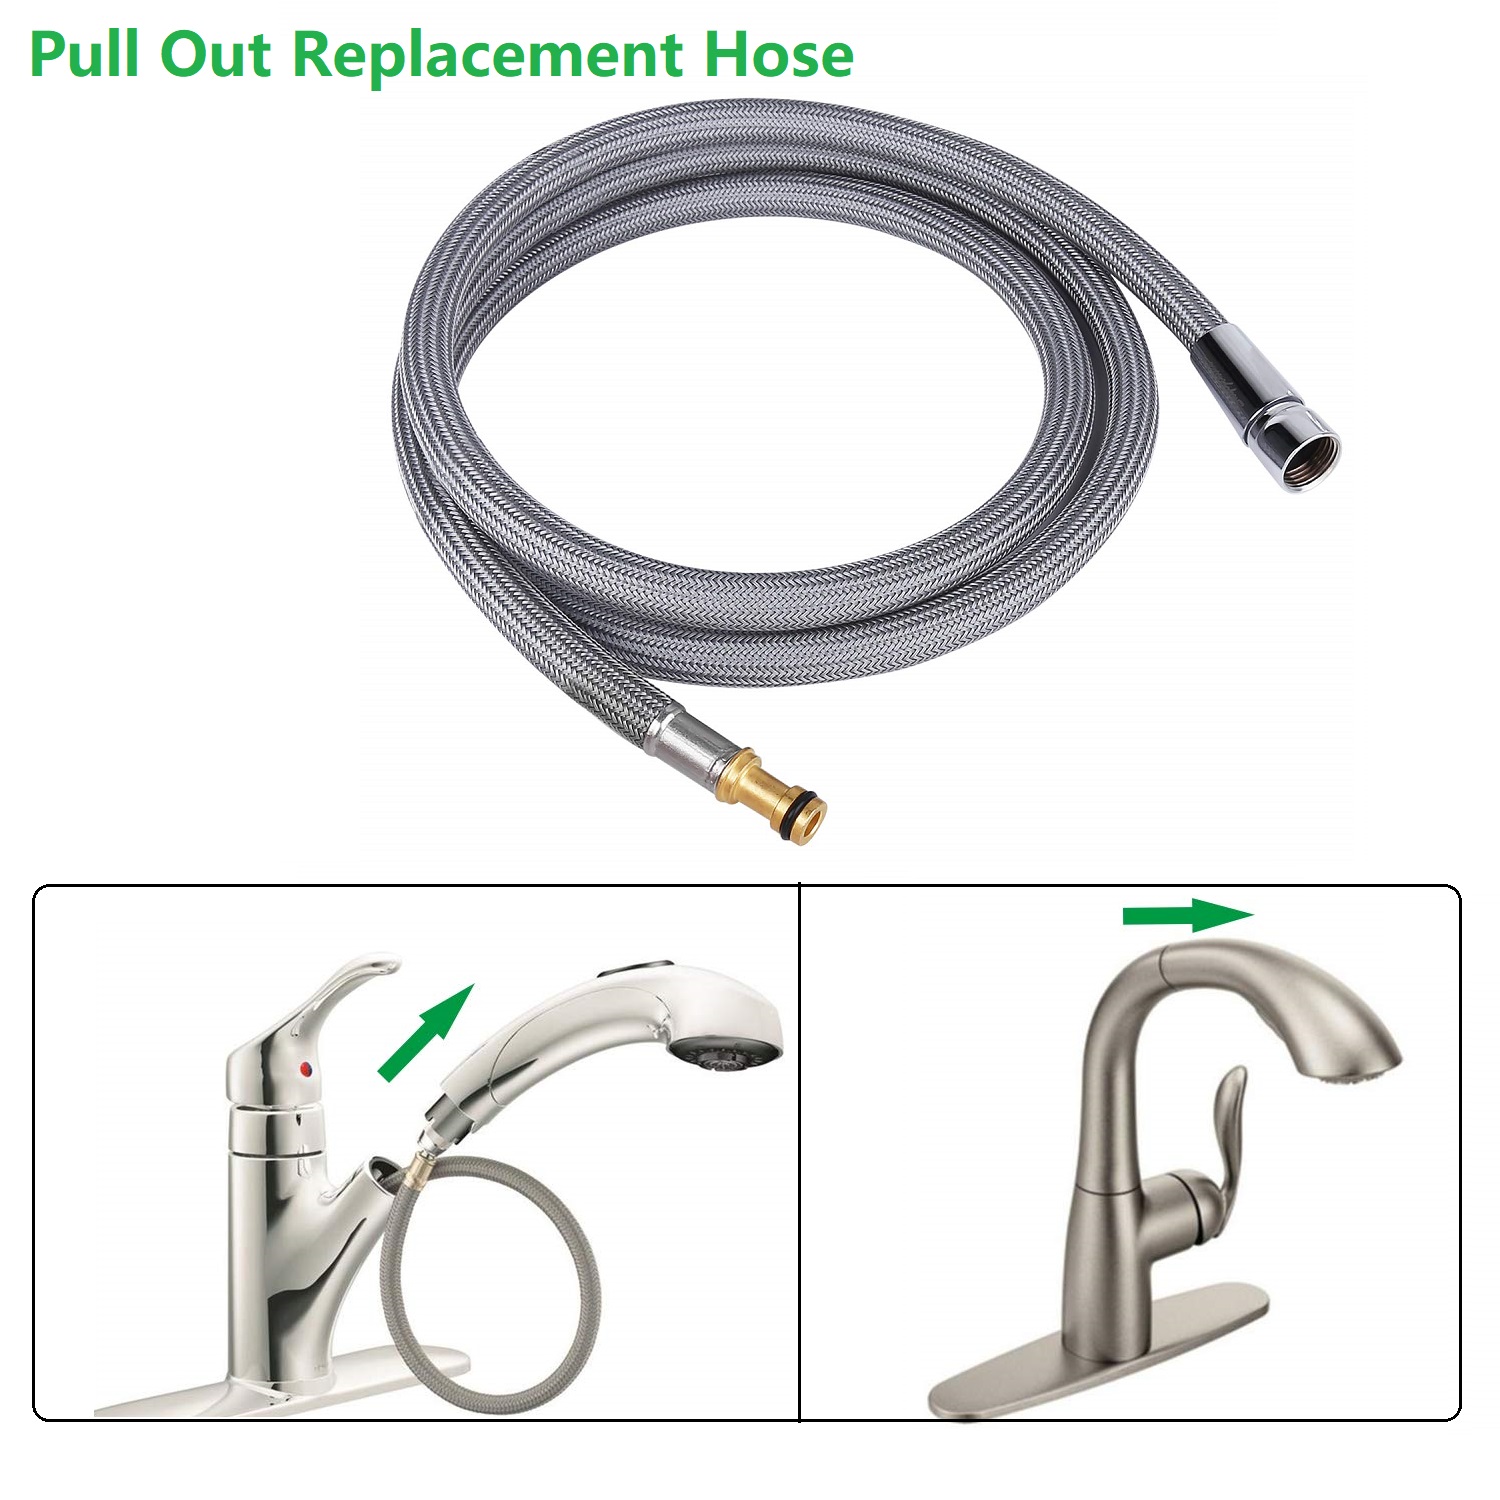 Pull Out Replacement Hose for Moen Kitchen Faucet 159560 Replacement Hose Kit | eBay